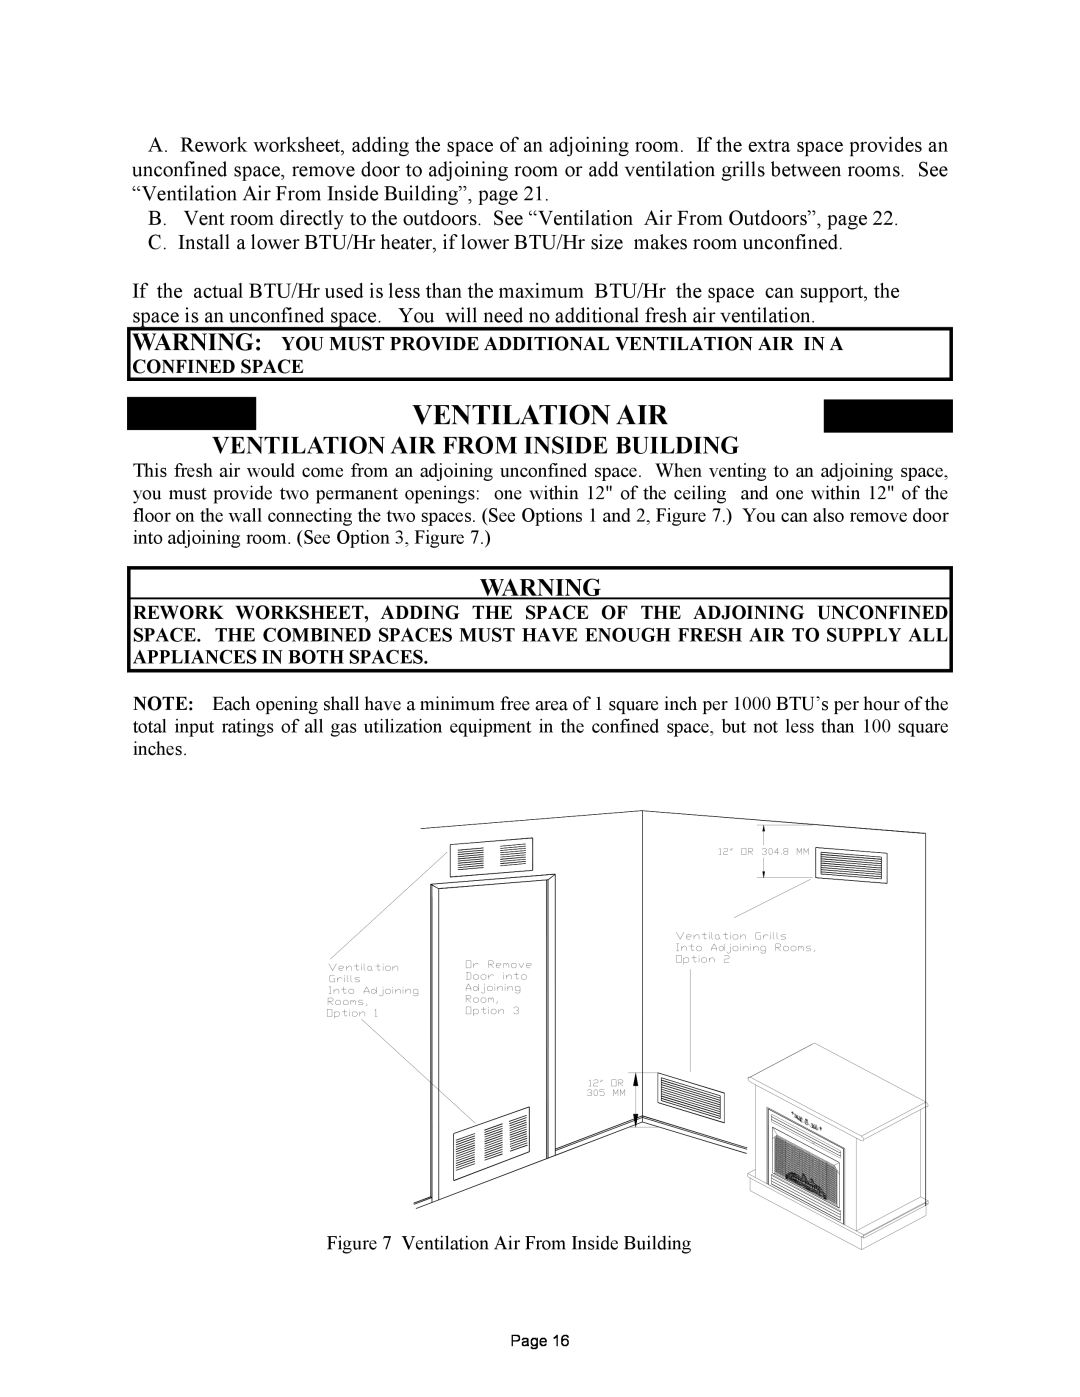 New Buck Corporation FP-BR-10-ZC manual Ventilation Air From Inside Building 